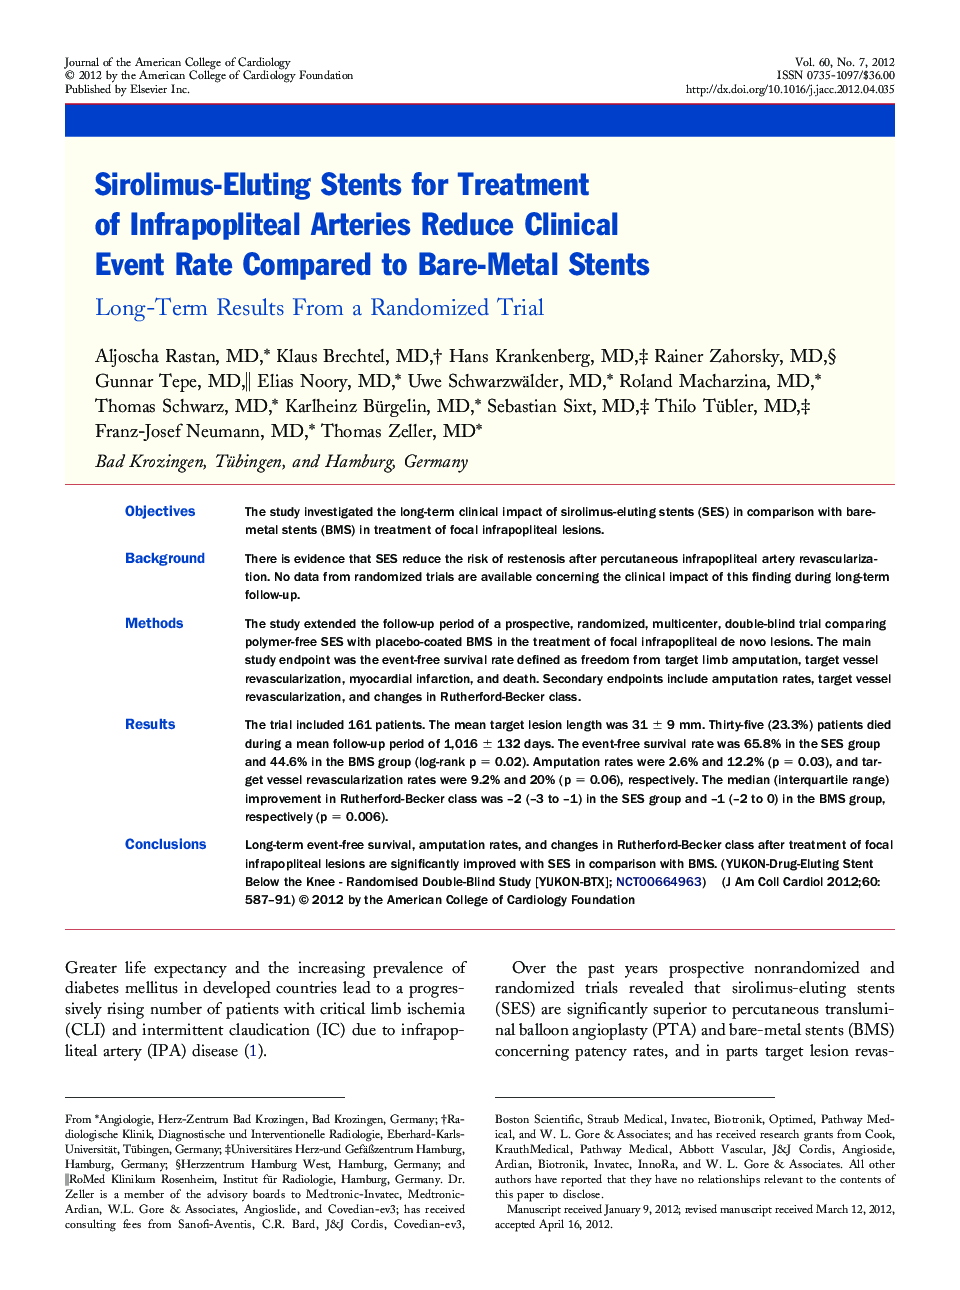 Sirolimus-Eluting Stents for Treatment of Infrapopliteal Arteries Reduce Clinical Event Rate Compared to Bare-Metal Stents : Long-Term Results From a Randomized Trial